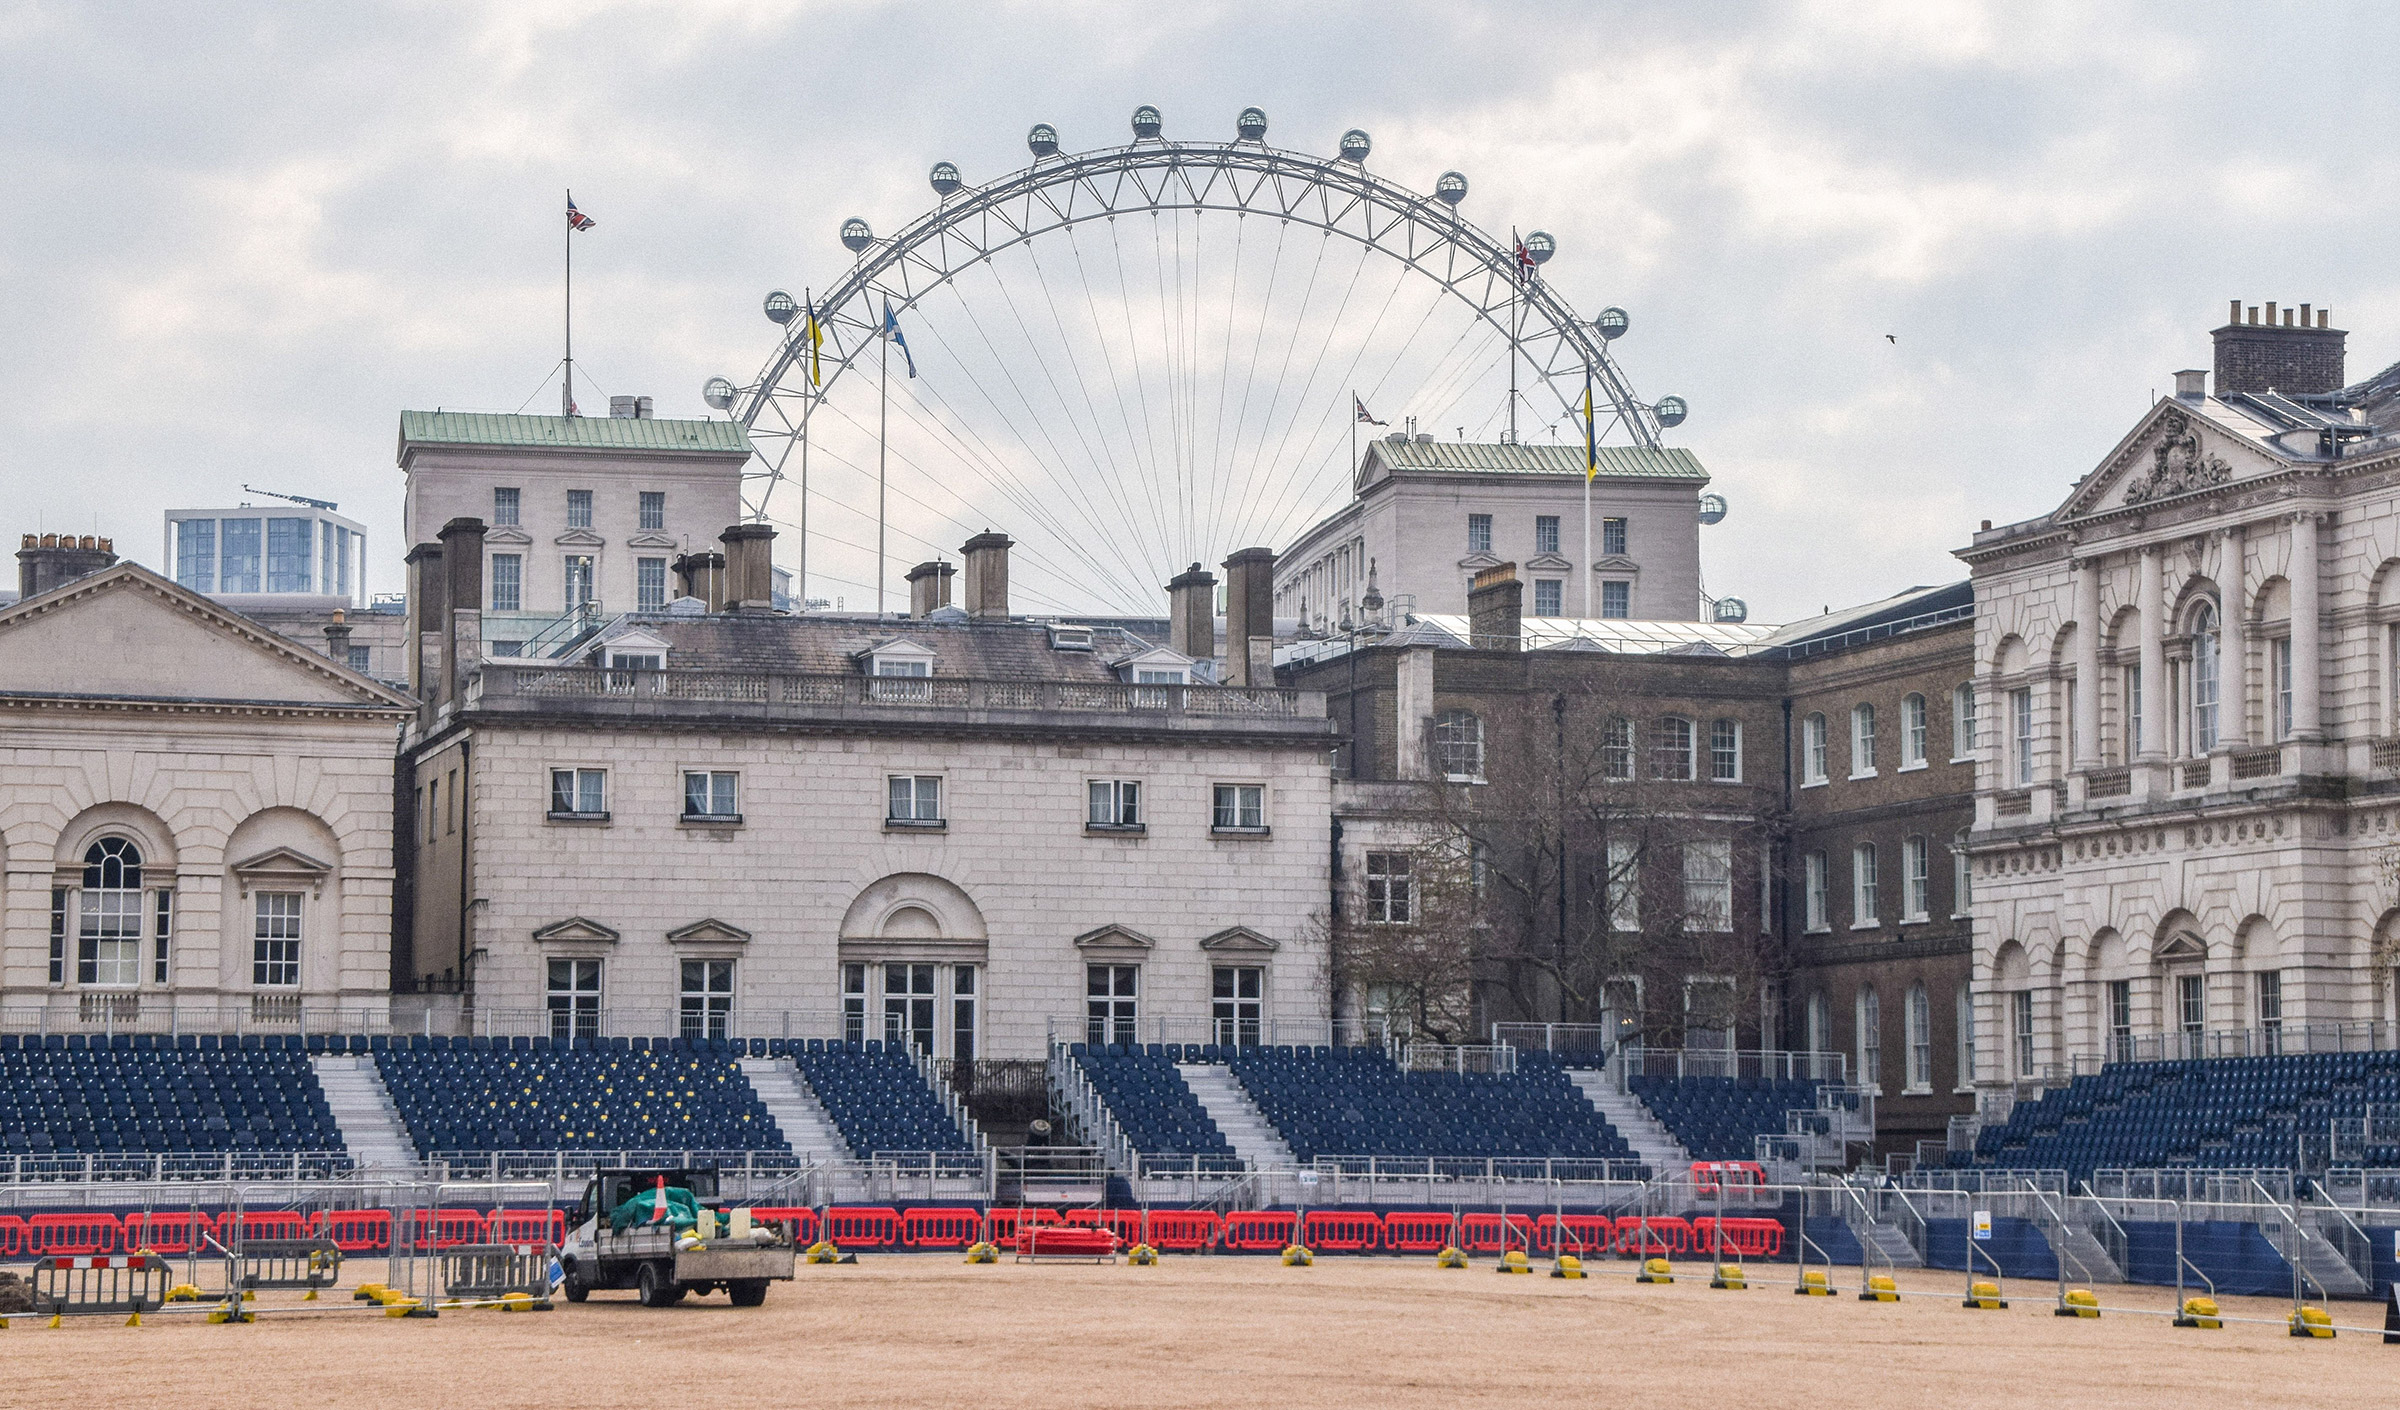 Workers install seats at Horse Guards Parade on April 17.